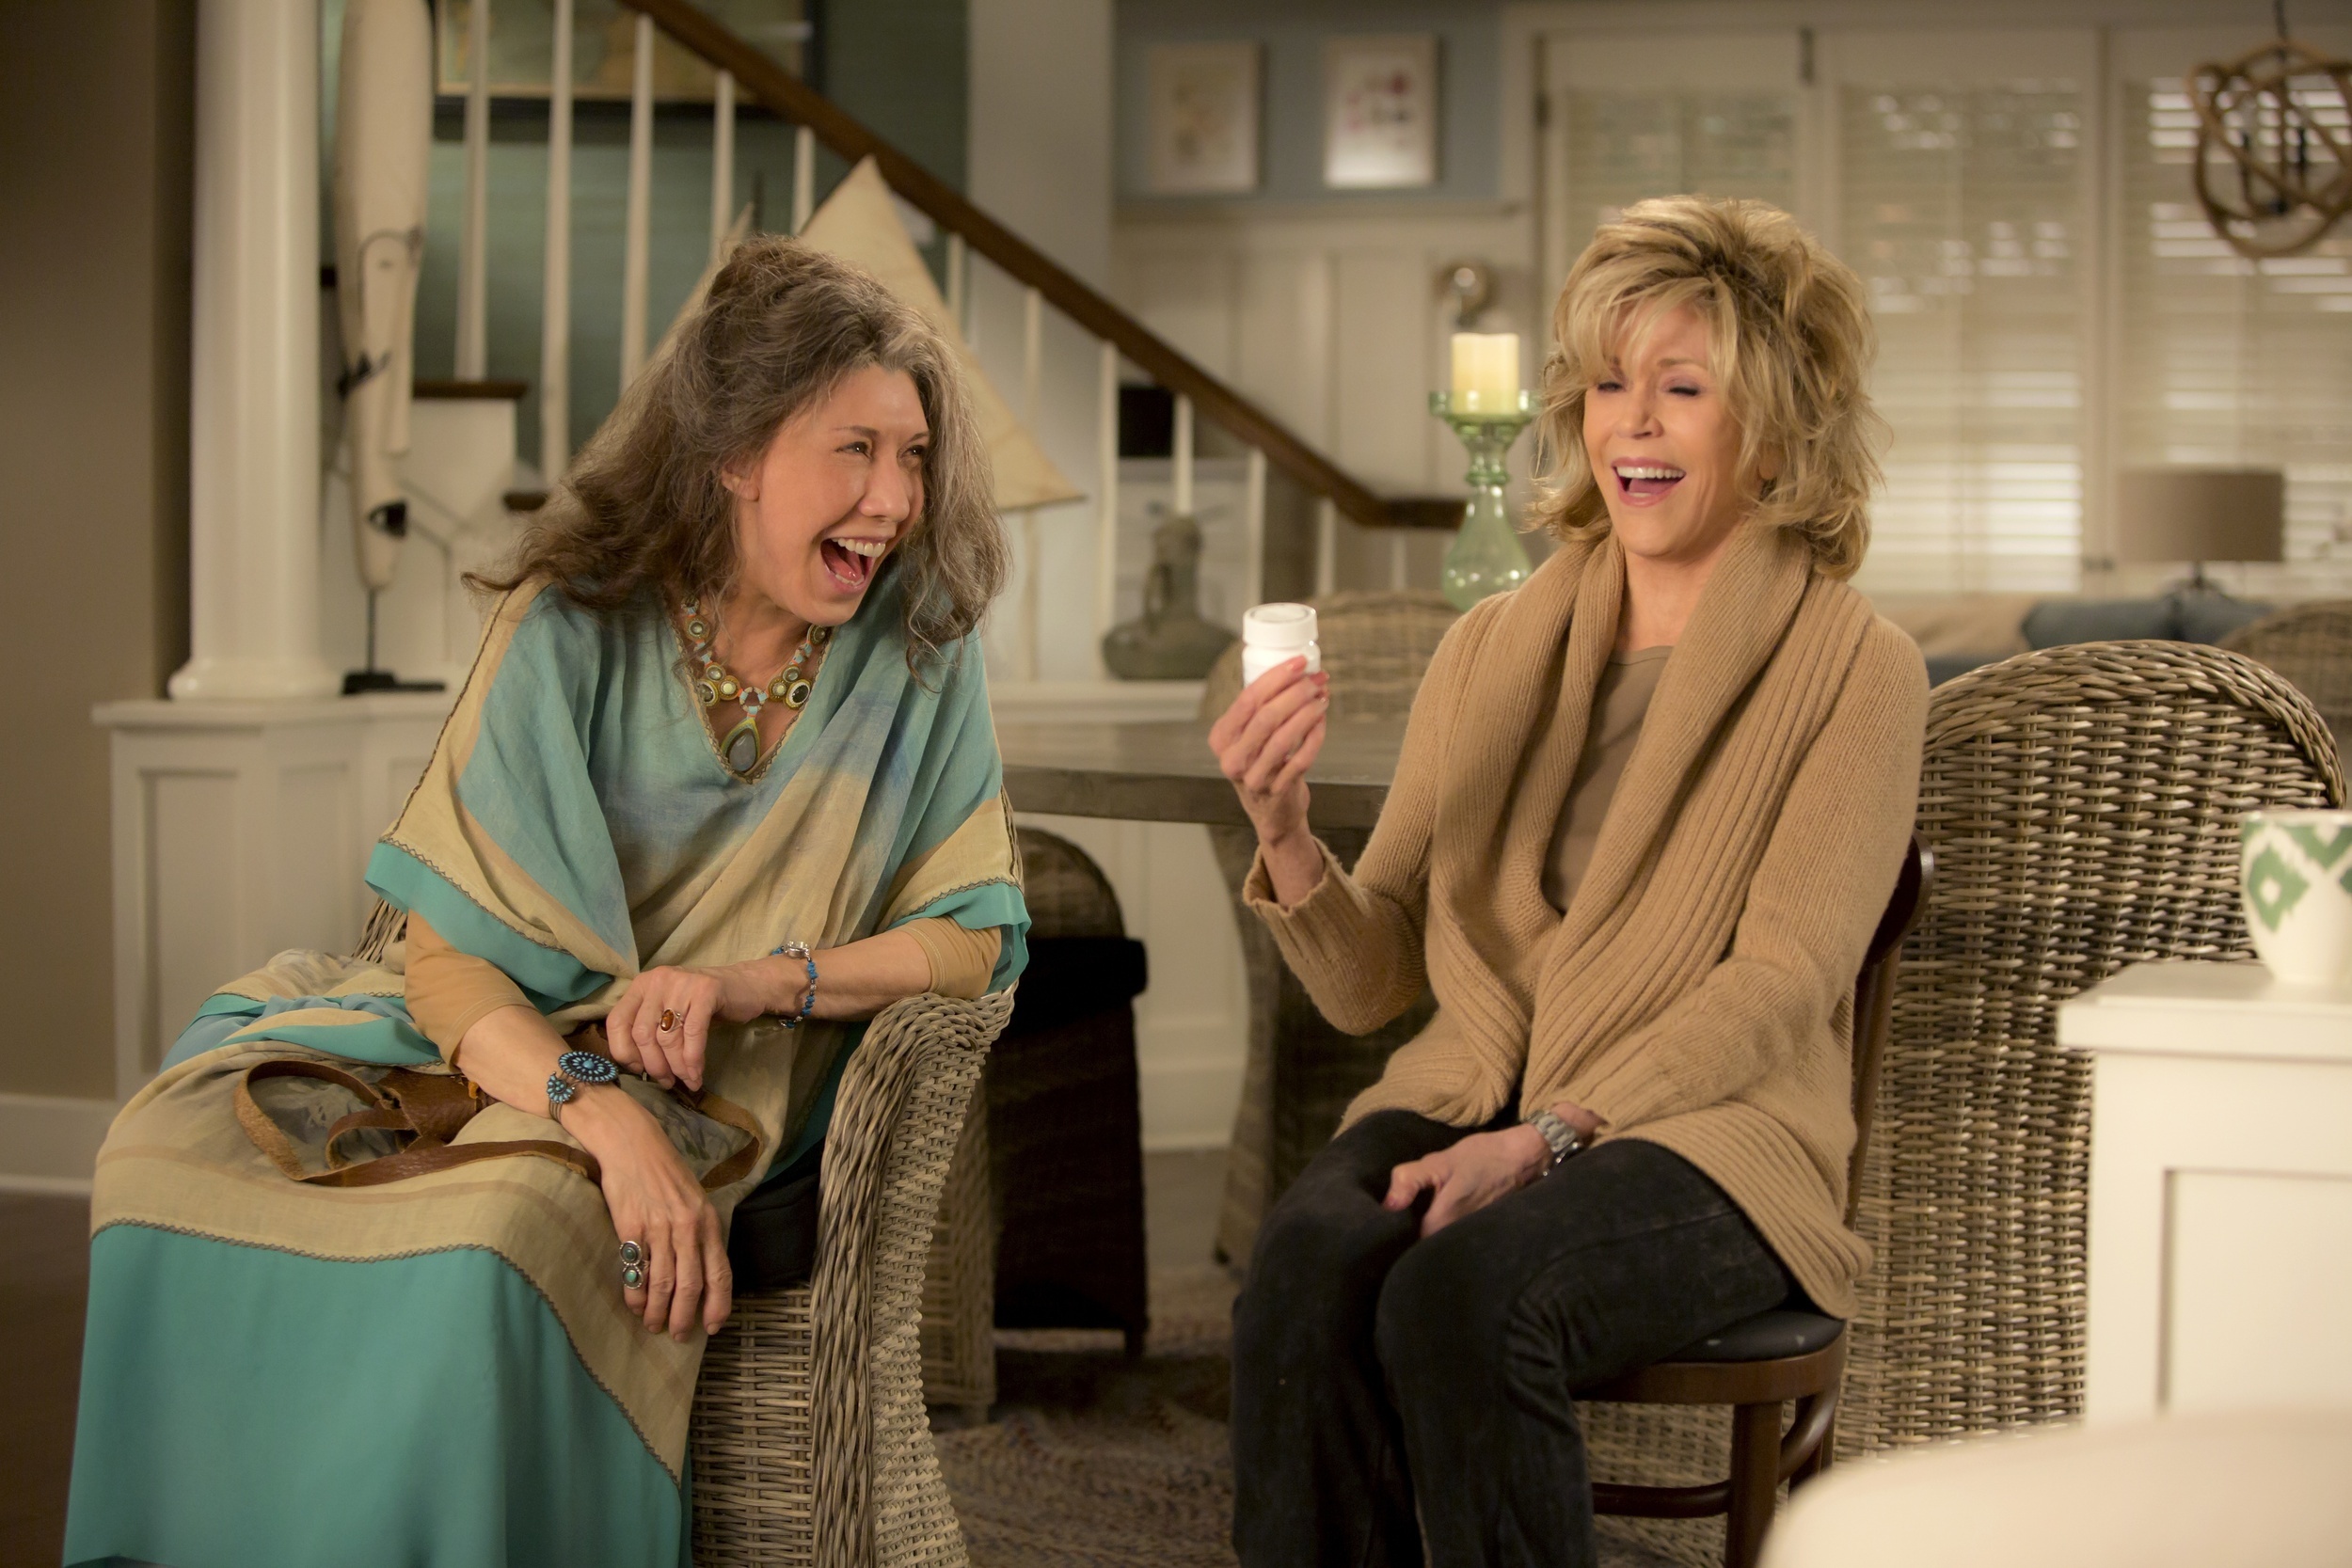 <p>Fonda waited a while to make the move to TV. She even did exercise tapes before she decided to give television acting a shot! We will note her 10-episode run on <em>The Newsroom</em>, but we are primarily thinking of <em>Grace and Frankie</em>, a long-running Netflix show she co-starred with Lily Tomlin.</p><p><a href='https://www.msn.com/en-us/community/channel/vid-cj9pqbr0vn9in2b6ddcd8sfgpfq6x6utp44fssrv6mc2gtybw0us'>Follow us on MSN to see more of our exclusive entertainment content.</a></p>